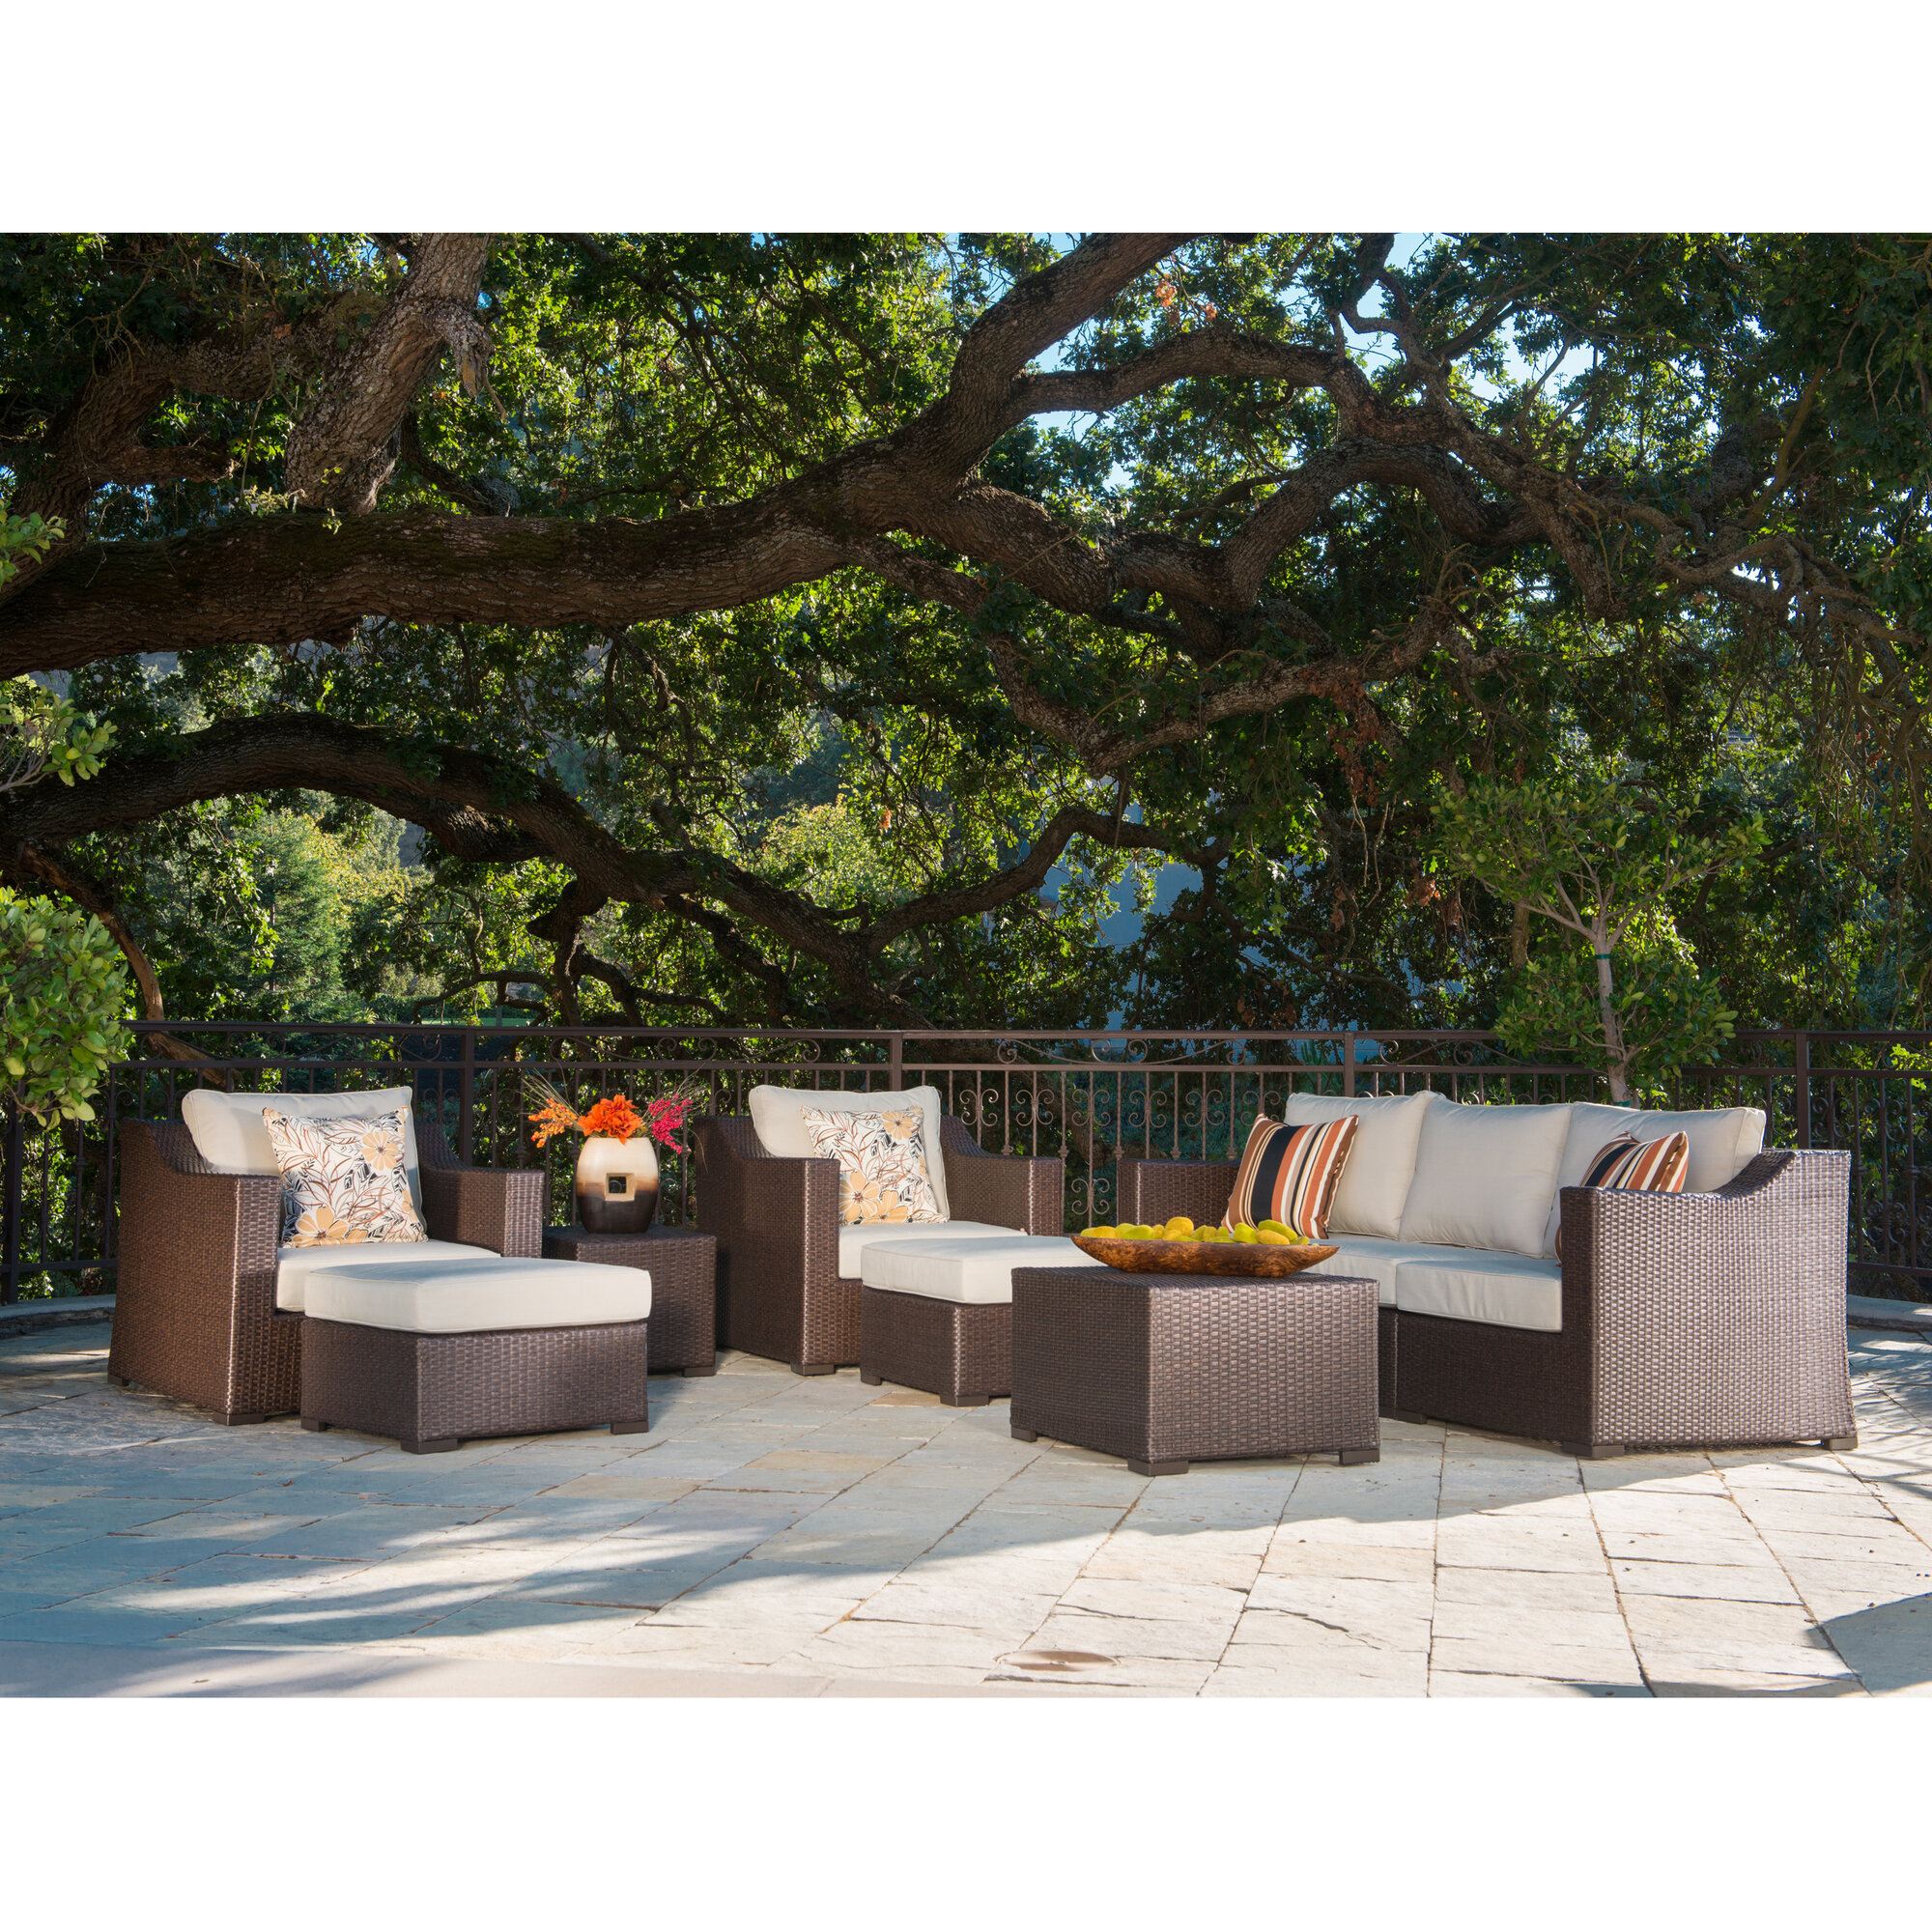 Details About Bayou Breeze Haney Patio 9 Piece Sofa Seating Group With Cushions intended for measurements 2000 X 2000